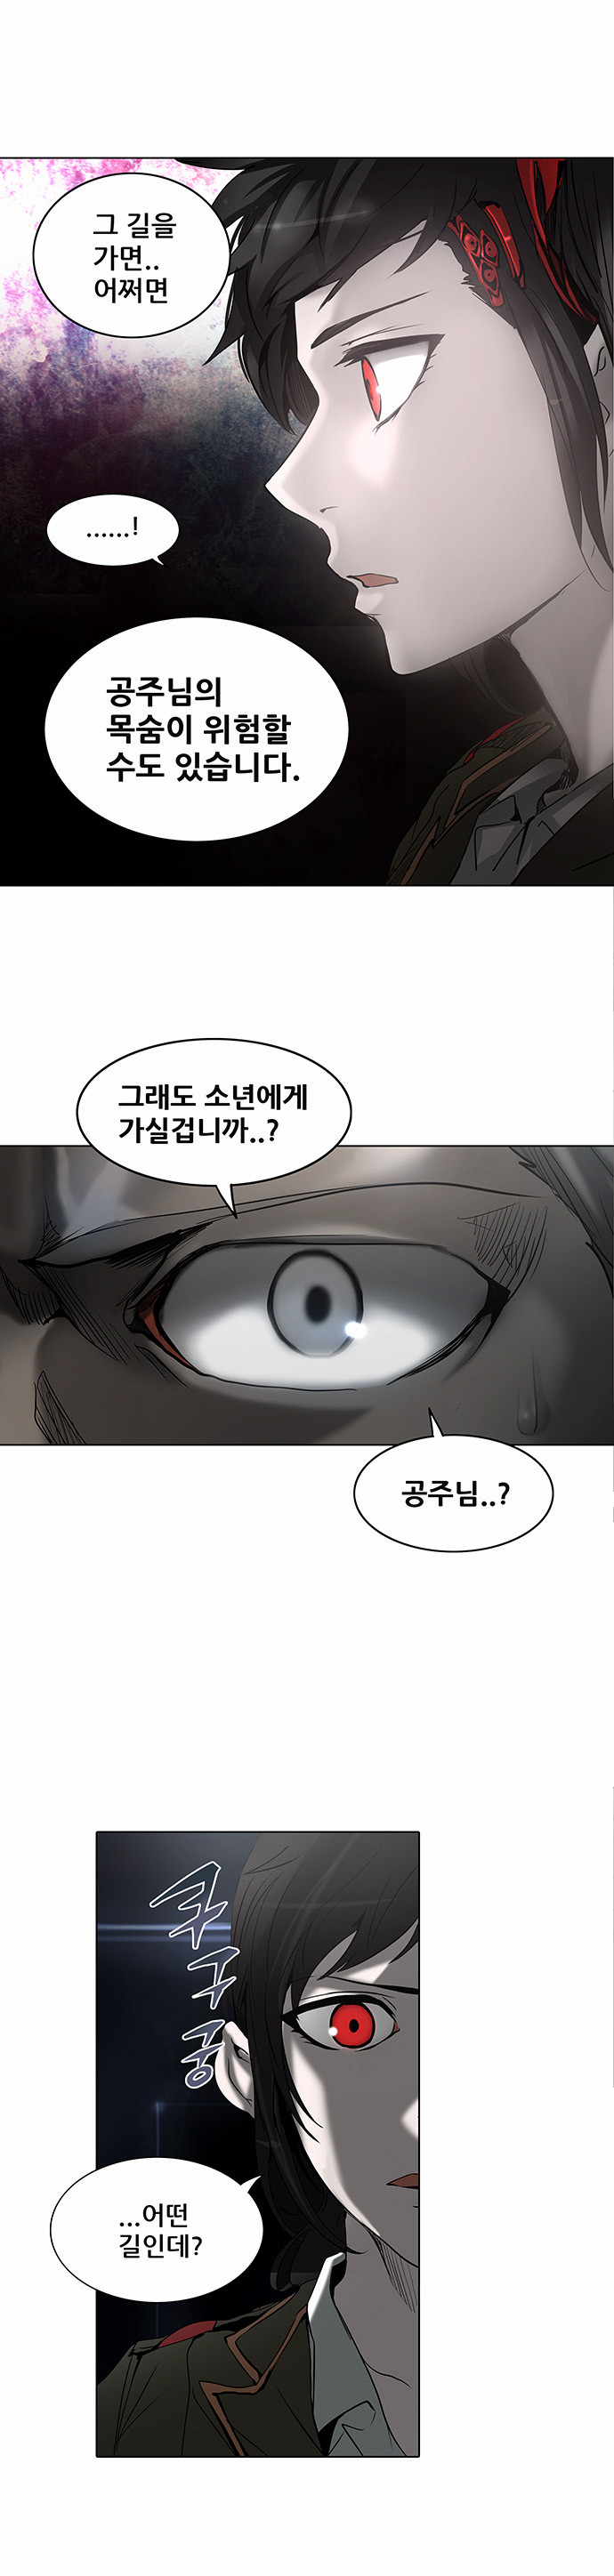 Tower of God - Chapter 277 - Page 1